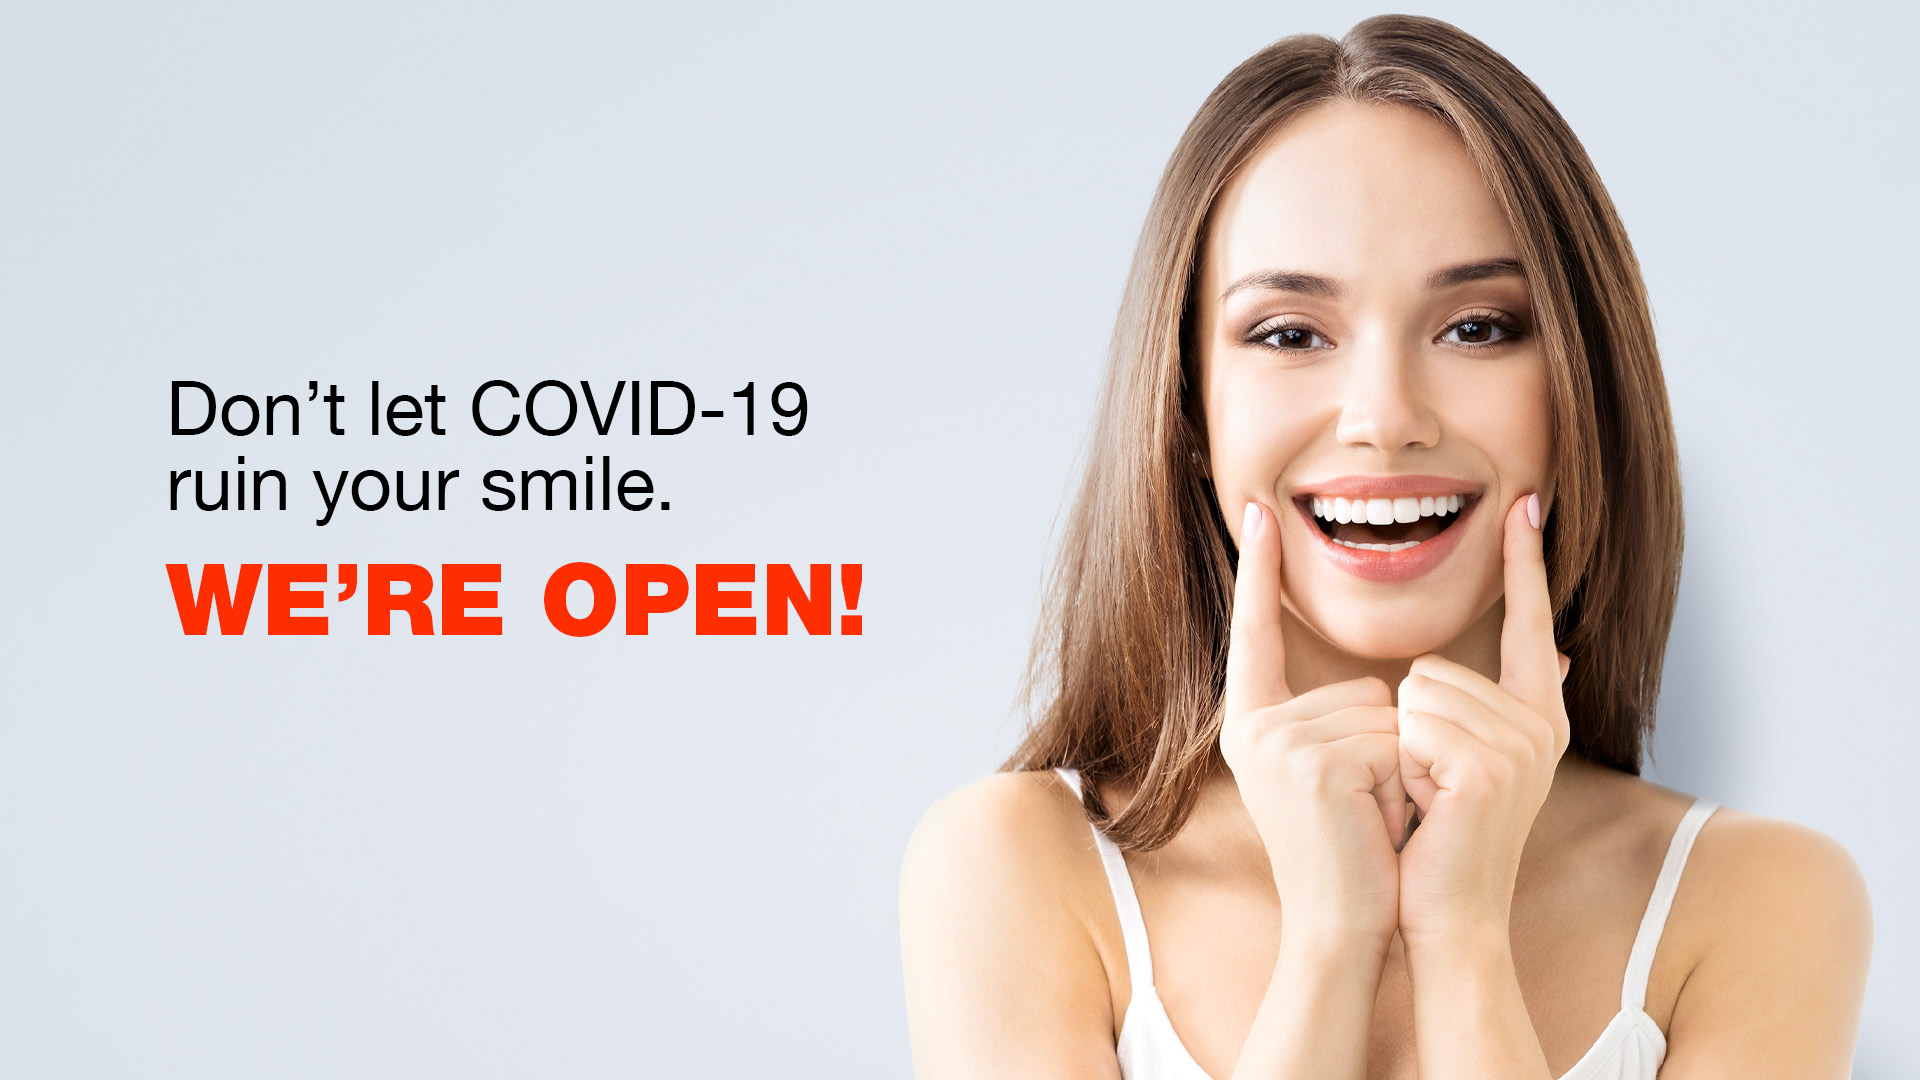 Don't let COVID-19 Ruin your smile. We're Open!